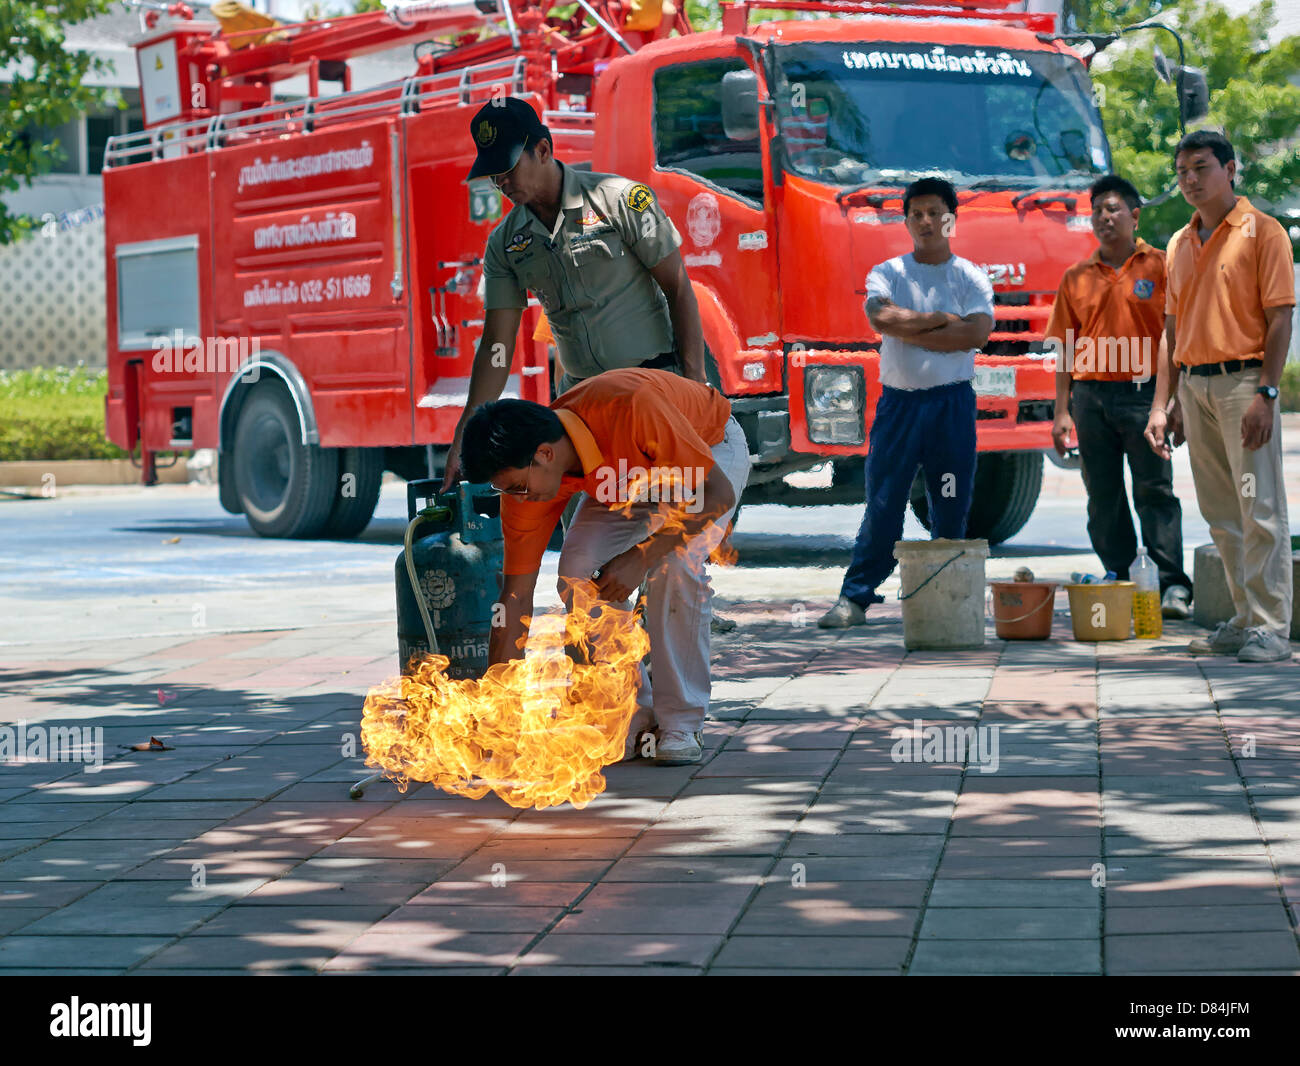 Home appliance fire safety education. Thailand fire officer demonstrating the potential hazard of fire from a domestic propane gas bottle. Stock Photo